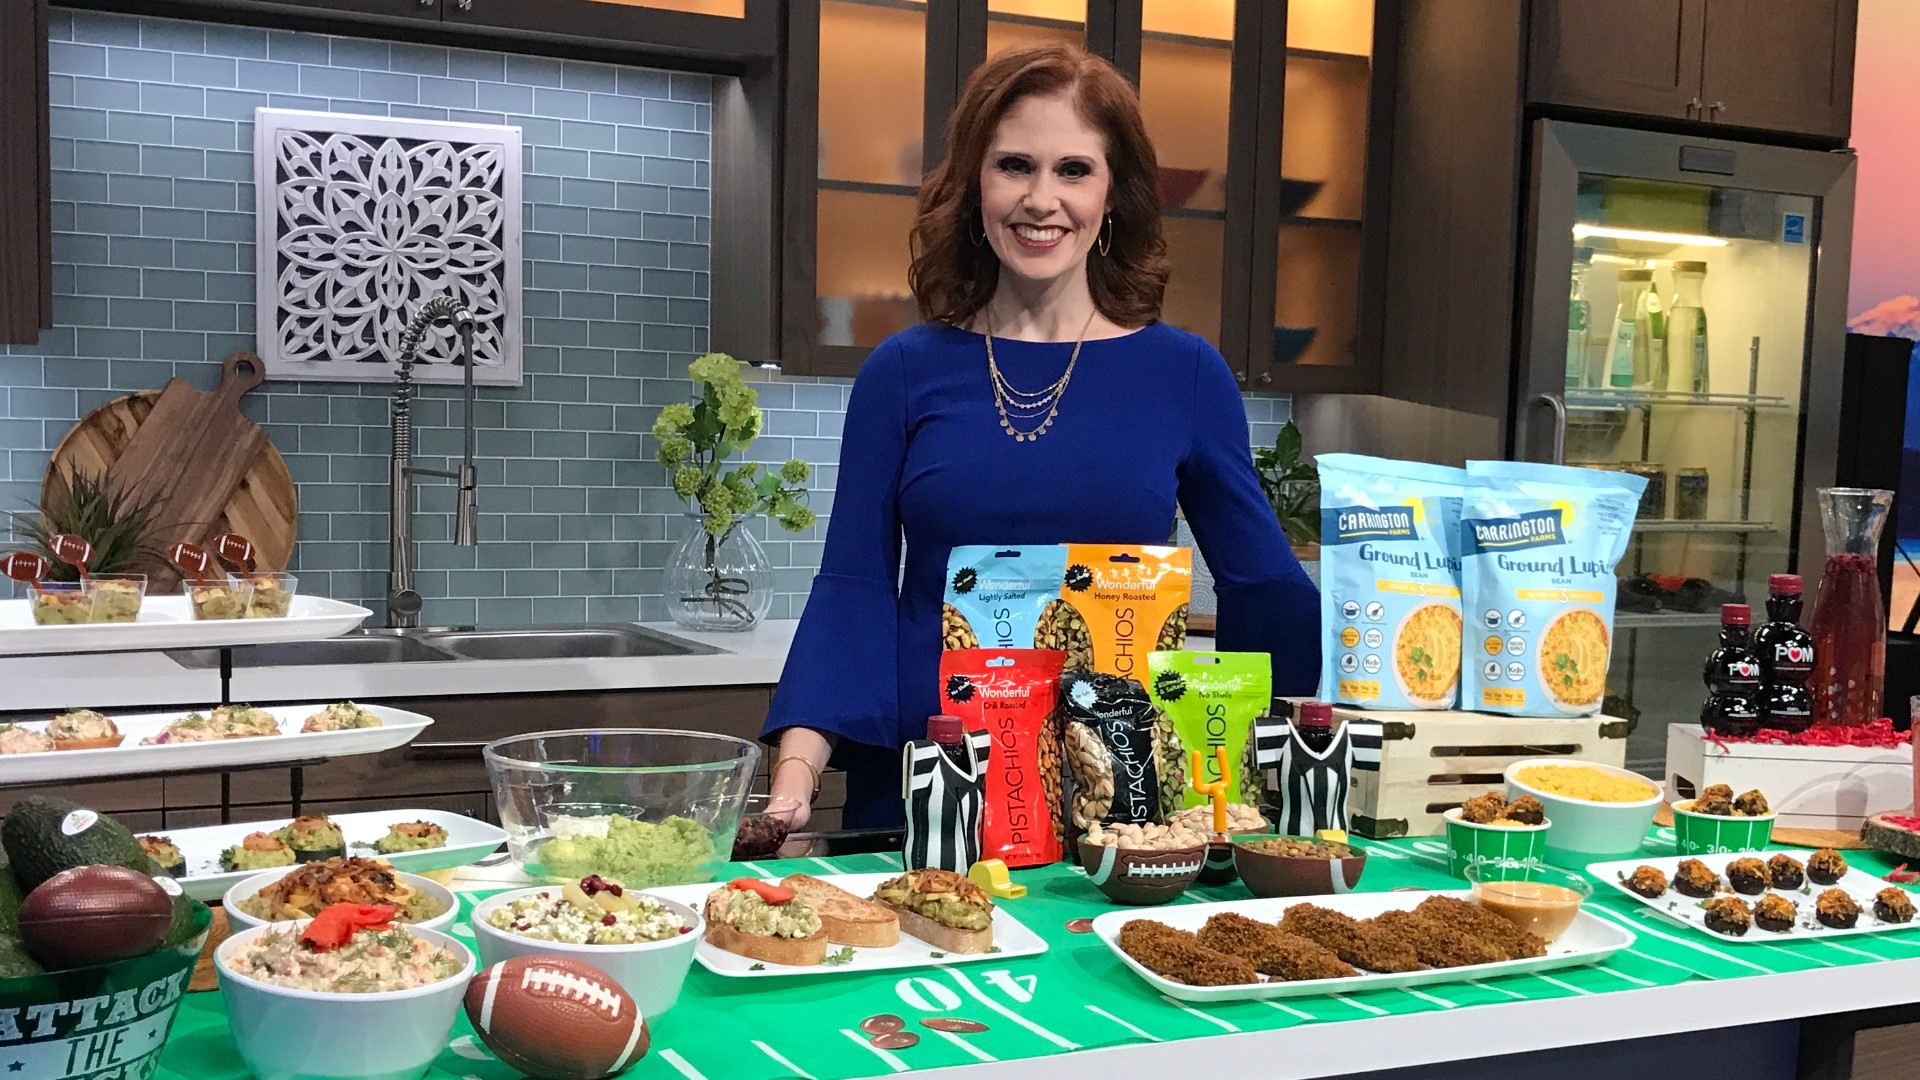 Super Bowl parties don’t have to be filled with artery-clogging chips and dips. Healthy and delicious options are easy adds to the menu. Sponsored by Parker's Plate.